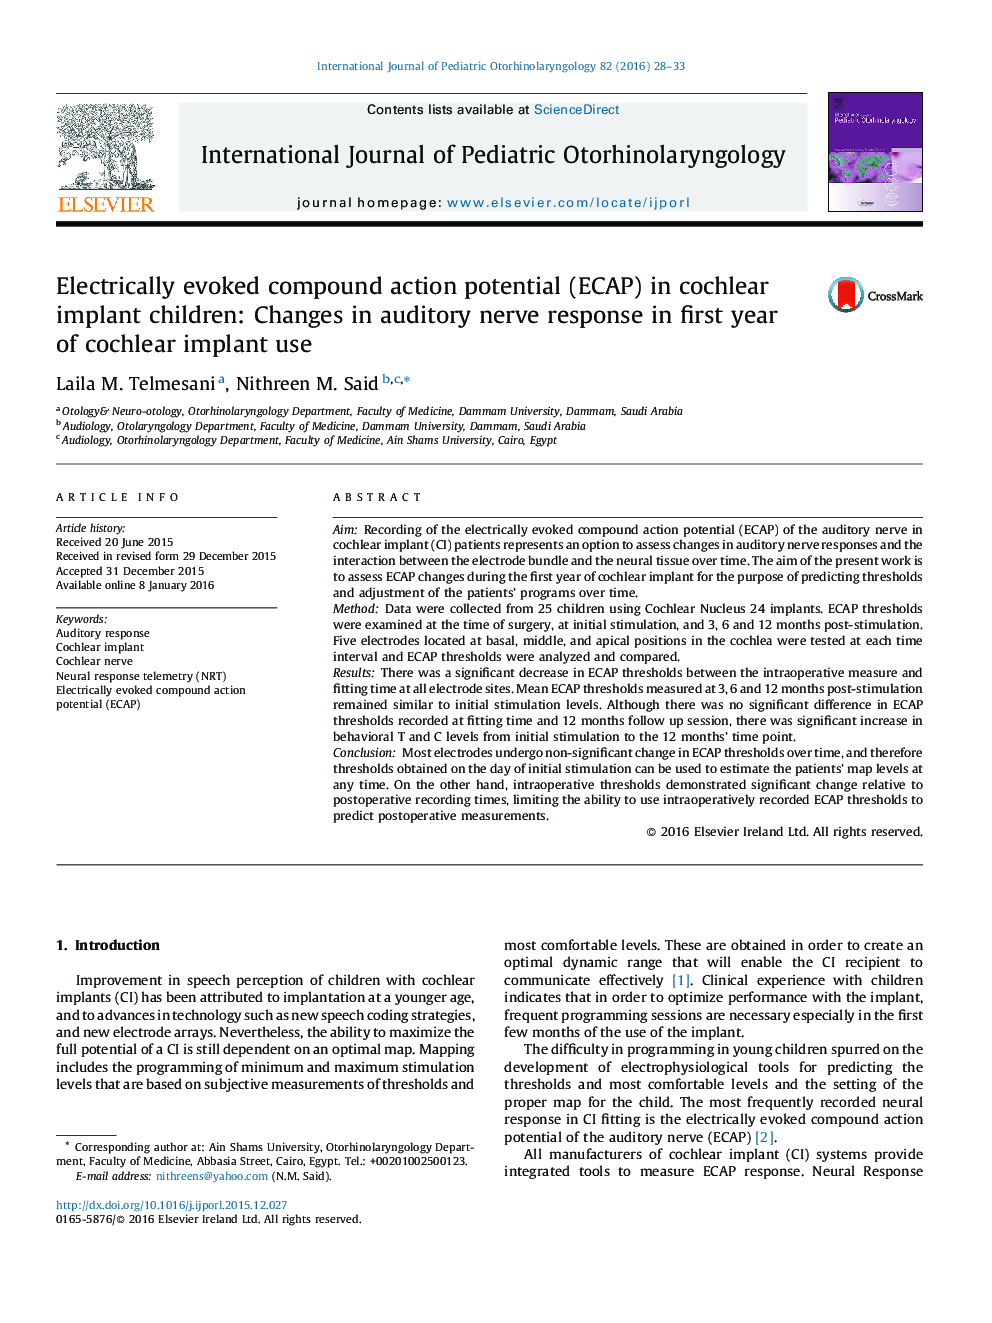 Electrically evoked compound action potential (ECAP) in cochlear implant children: Changes in auditory nerve response in first year of cochlear implant use